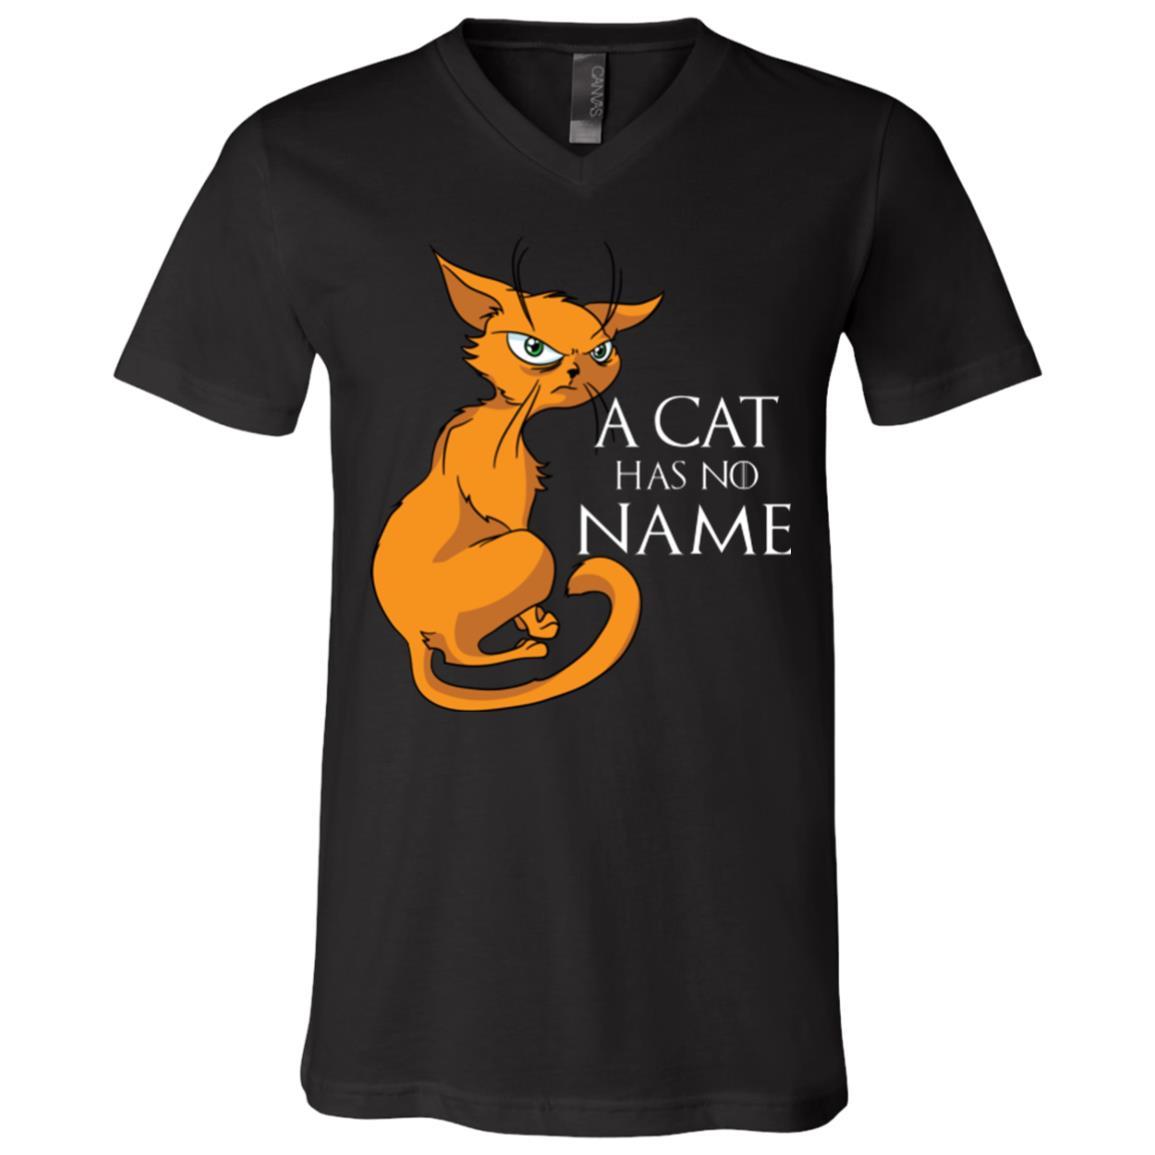 Cat Shirt Funny Game Of Thrones Parody Unisex Tees - GoneBold.gift